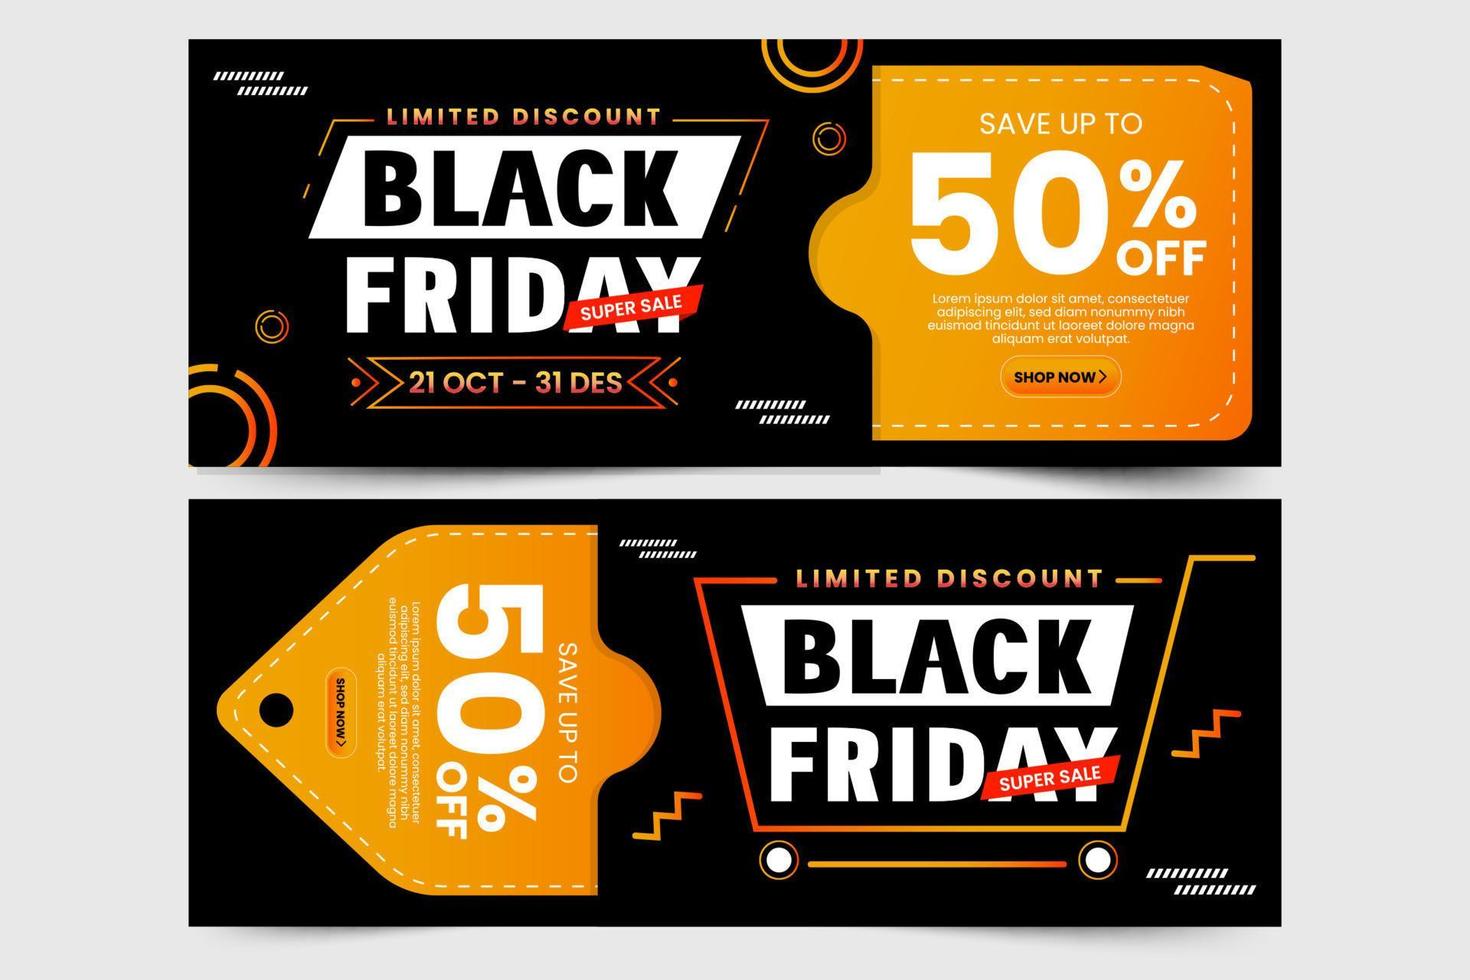 Black Friday Voucher or Coupon Design Template vector